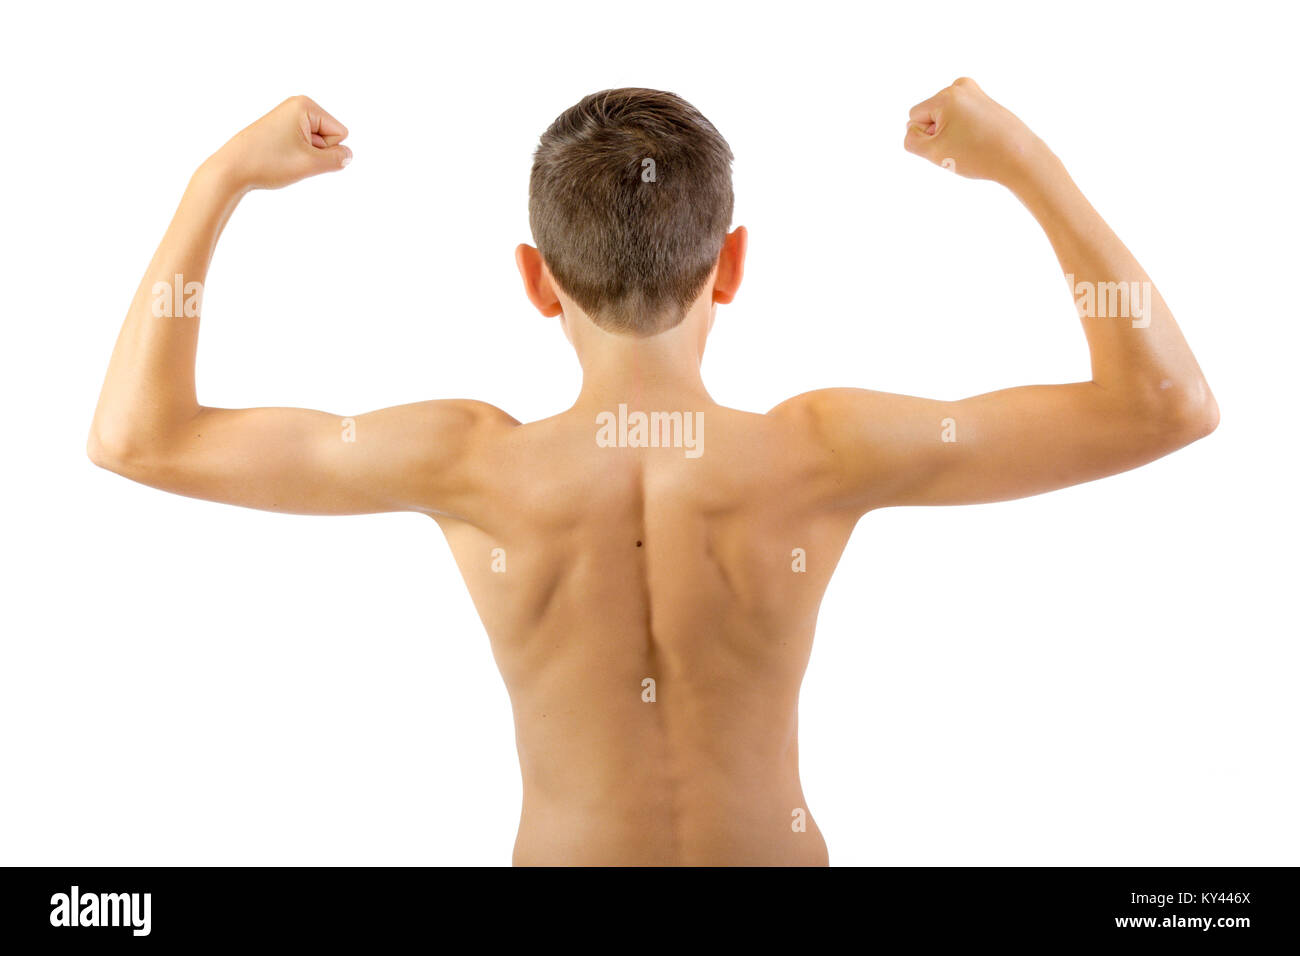 Skinny Man Arms High Resolution Stock Photography and Images - Alamy